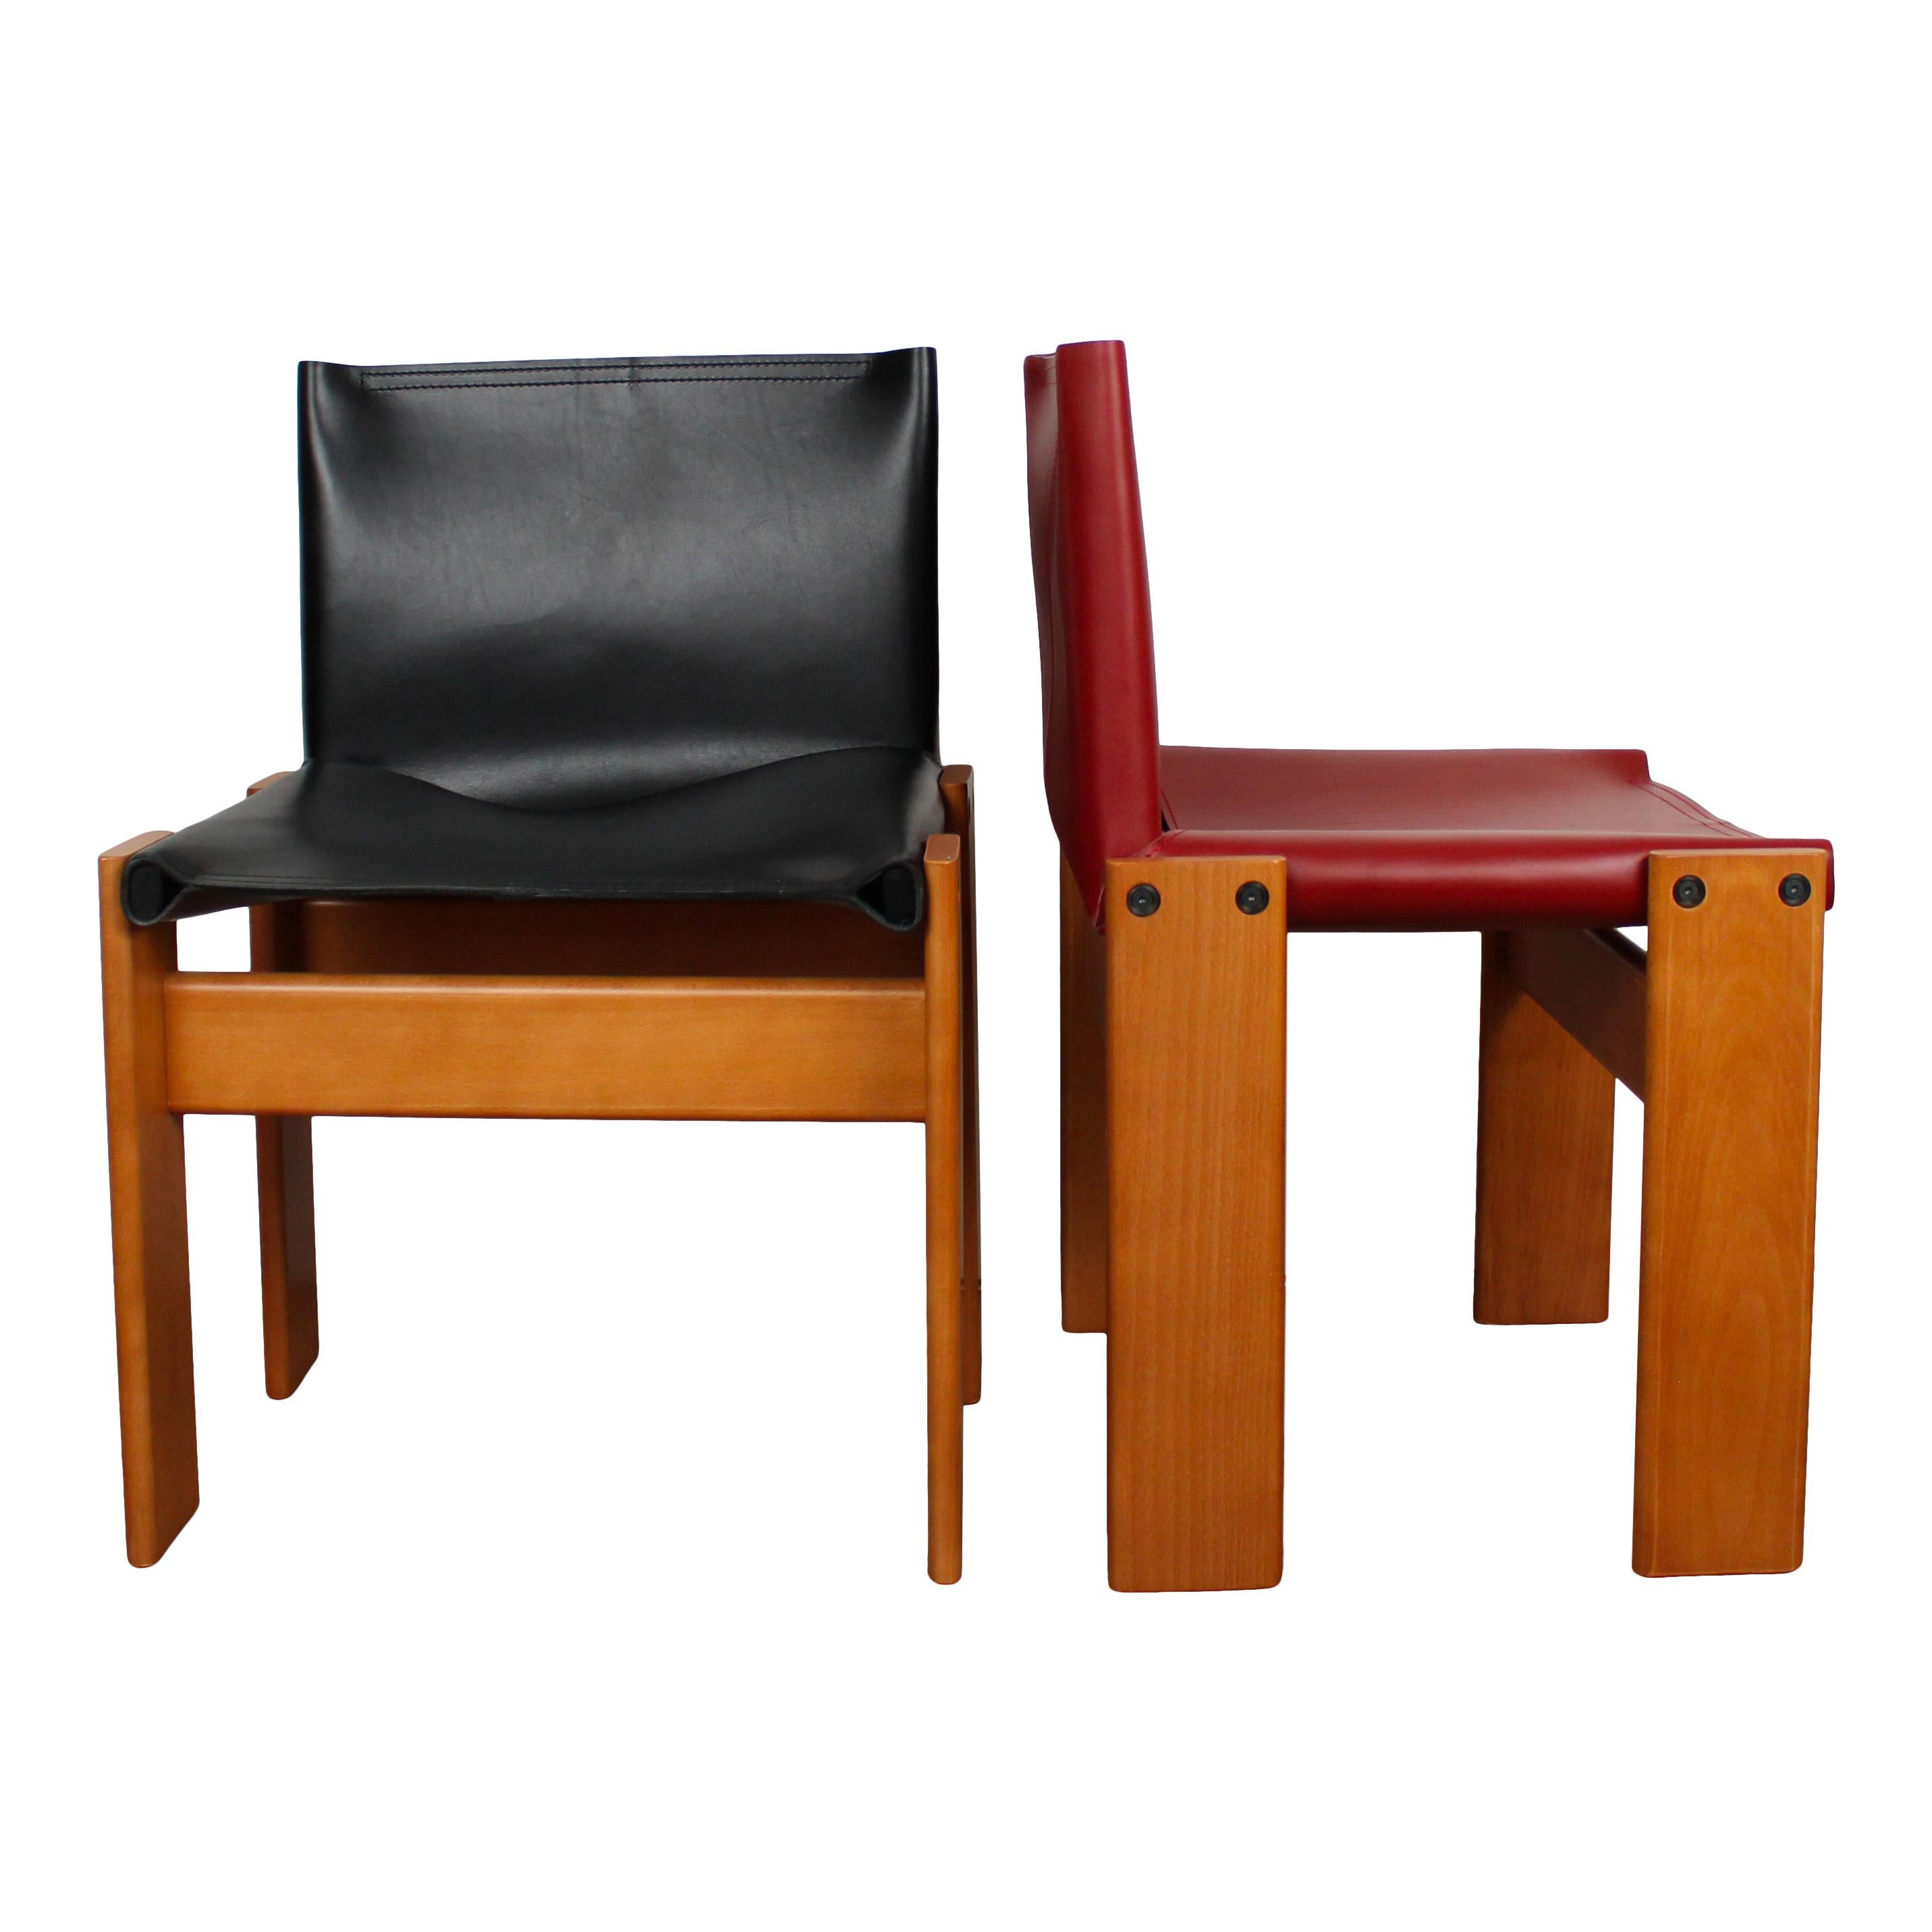 Afra & Tobia Scarpa Black & Red Leather Monk Dining Chair for Molteni, Set of 10 For Sale 2